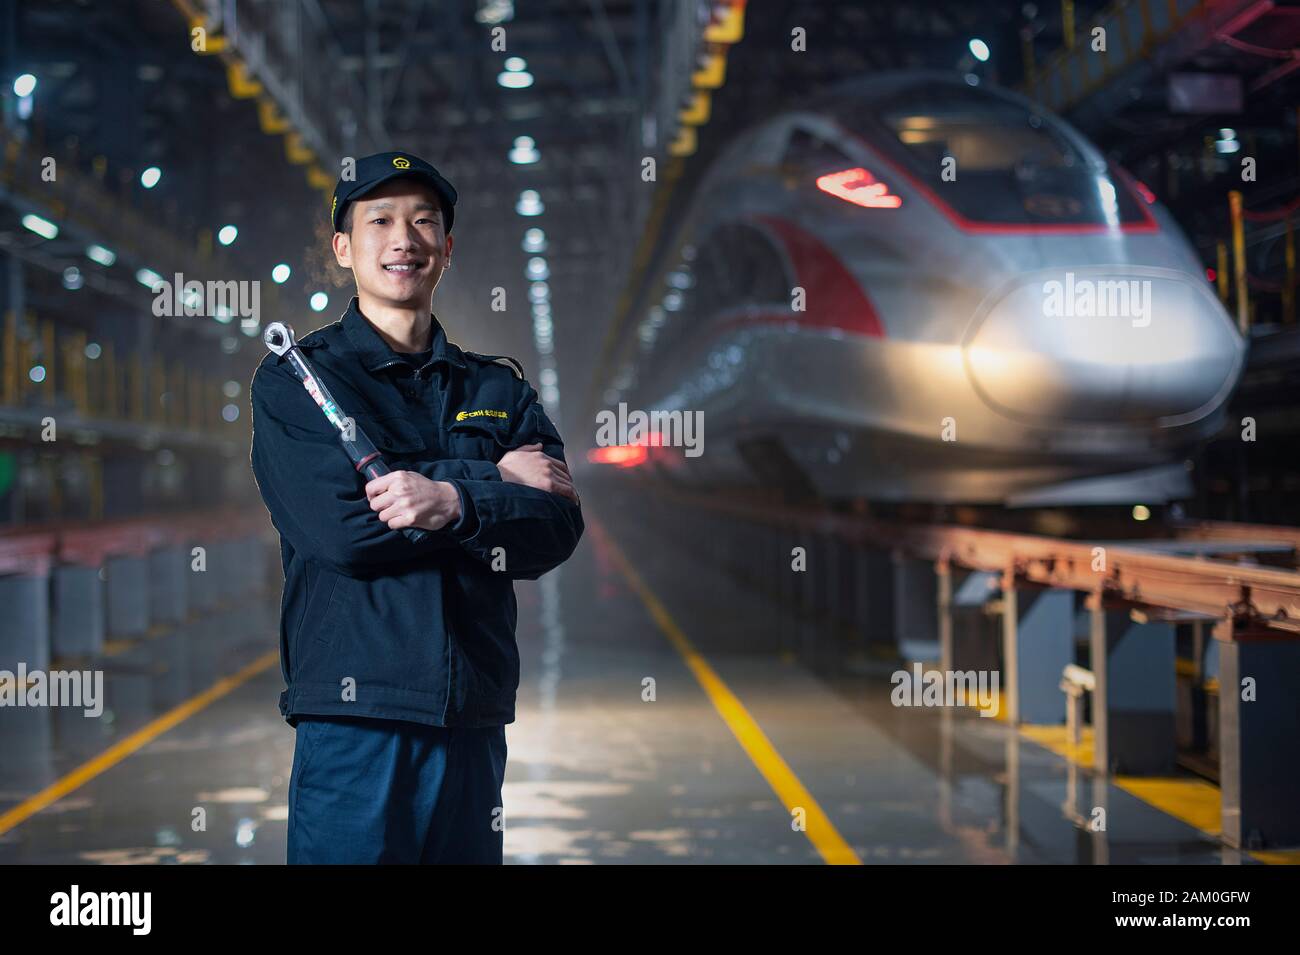 (200111) -- WUHAN, Jan. 11, 2020 (Xinhua) -- Wang Huihui, a mechanician for ground service, poses for a photo at the bullet train overhaul base in central China's Hubei Province, Jan. 3, 2020. China, the world's most populated country, on Jan. 10 ushered in its largest annual migration, 15 days ahead of the Spring Festival, or the Lunar New Year. This year, three billion trips will be made during the travel rush from Jan. 10 to Feb. 18 for family reunions and travel, according to official forecast. The 40-day travel rush is known as Chunyun in Chinese. The Lunar New Year falls on Jan. 25 th Stock Photo